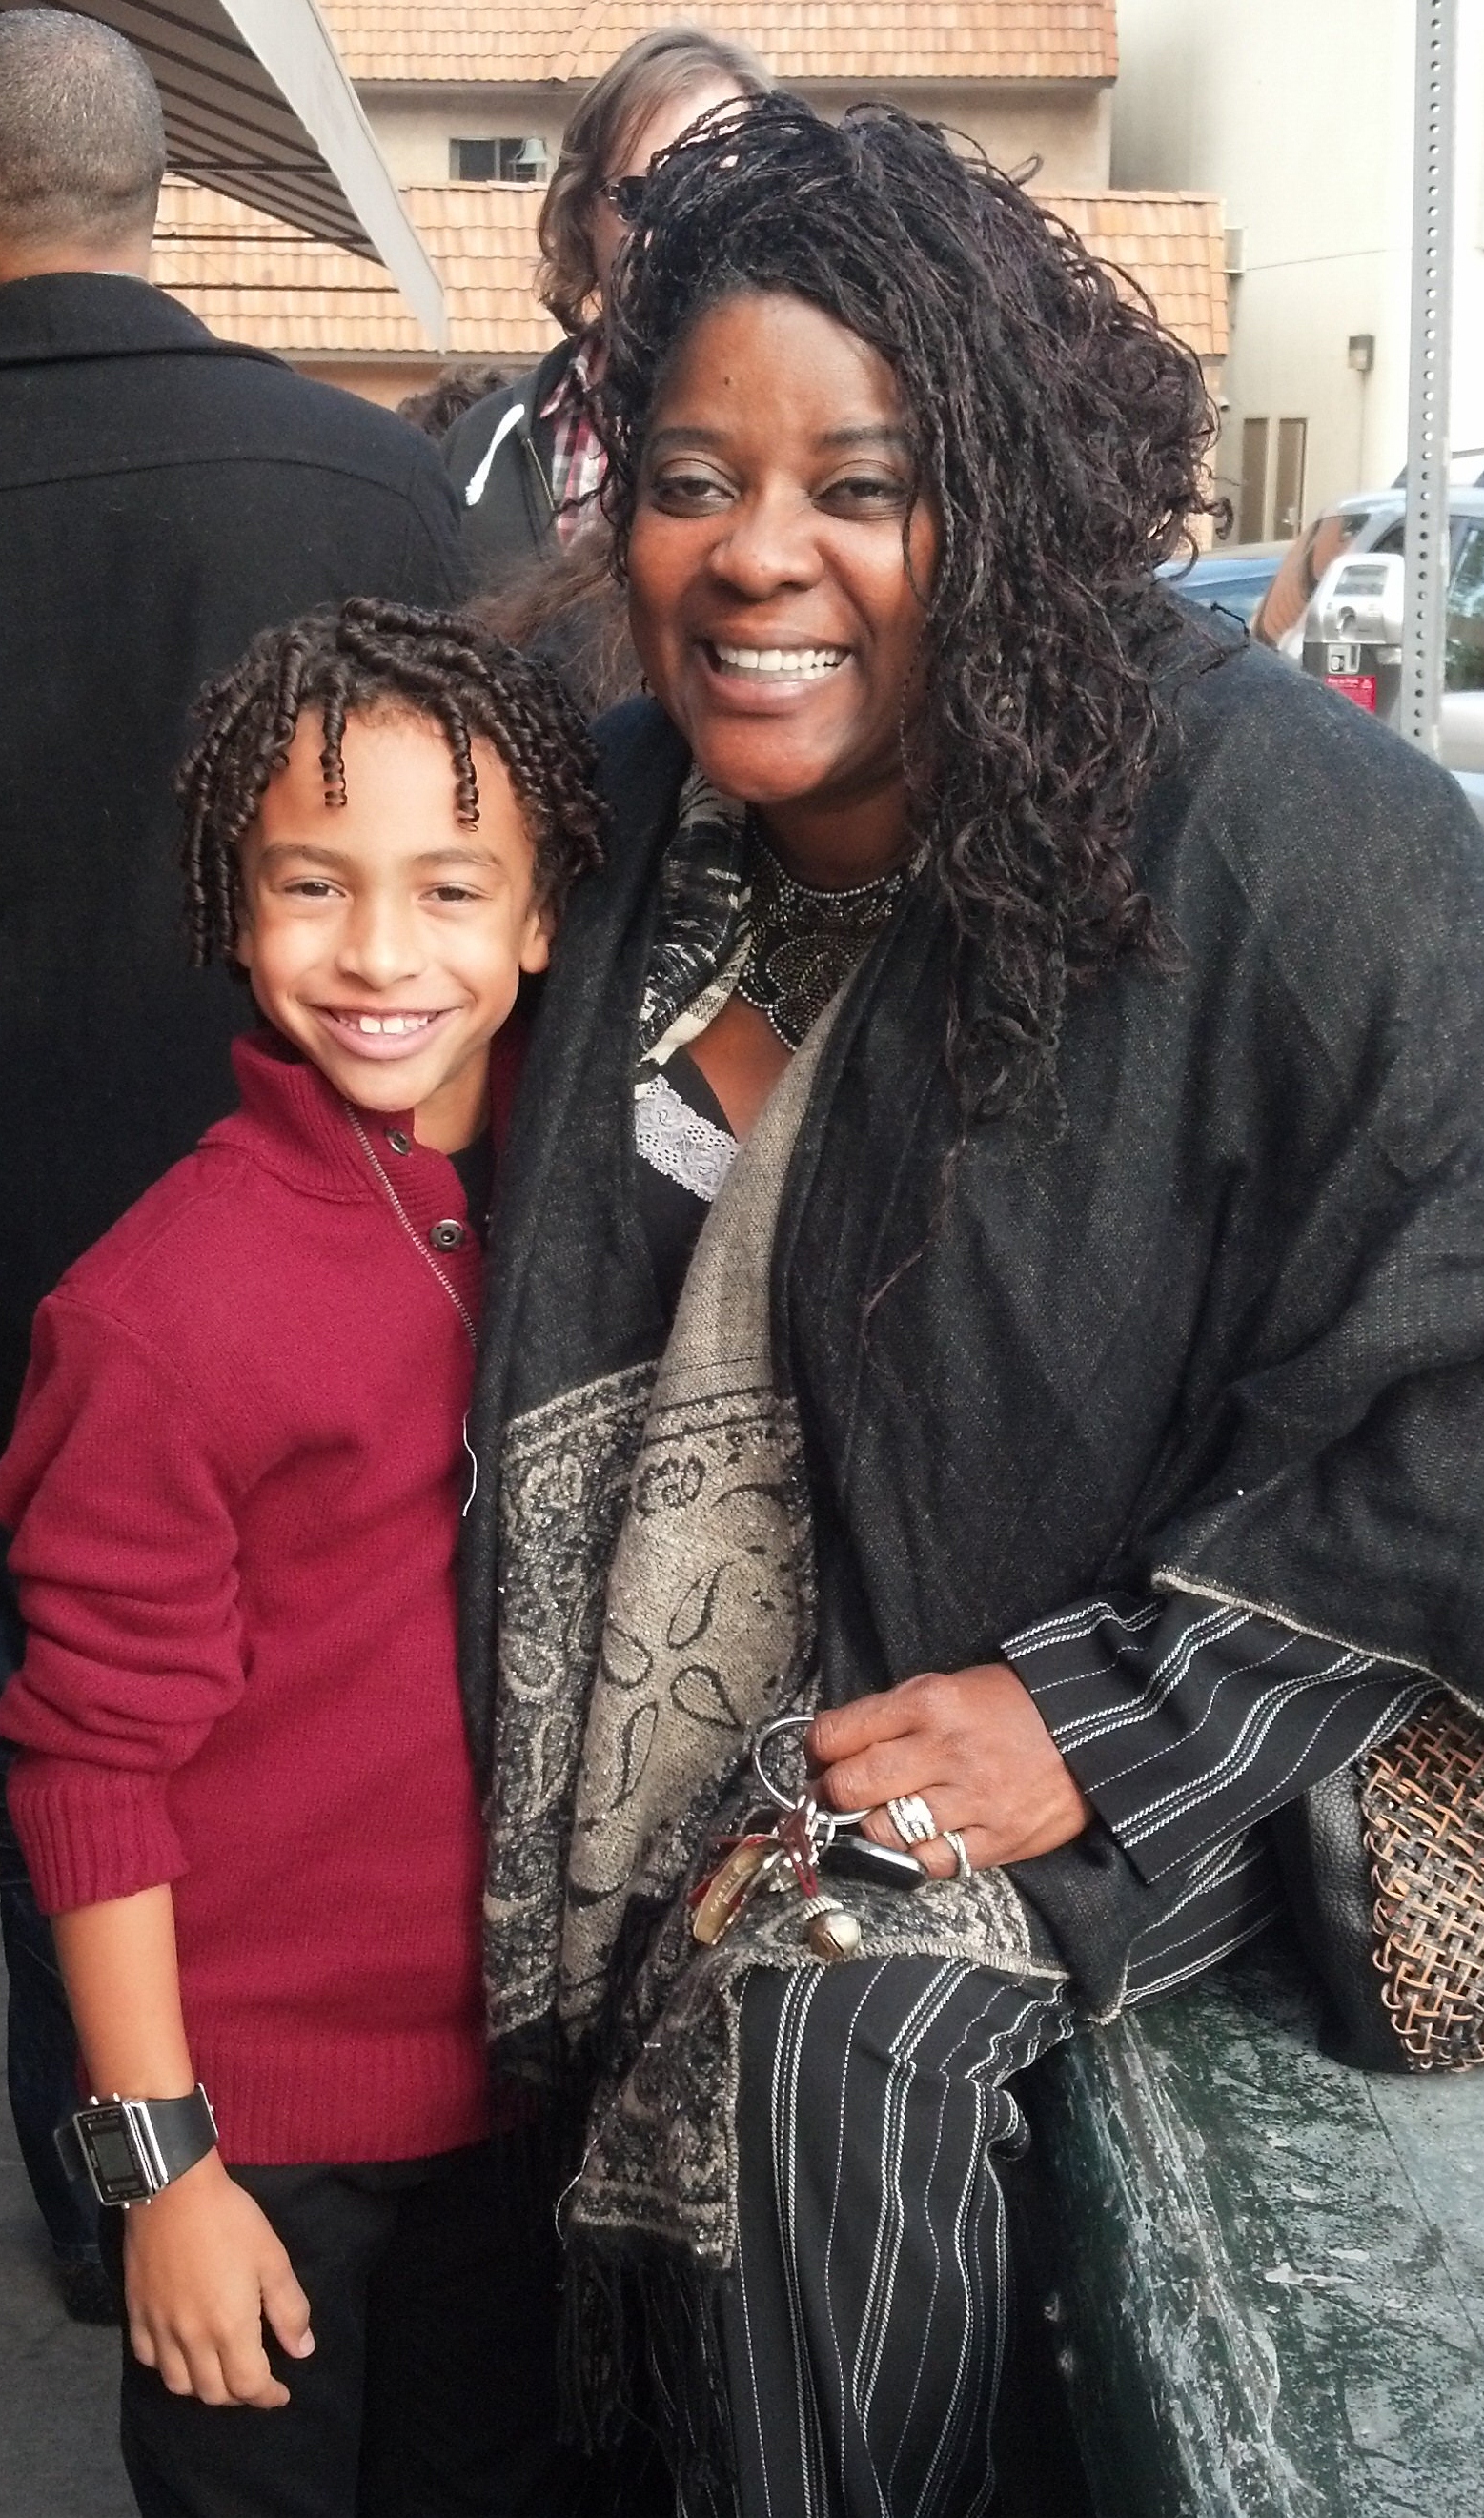 Jaden Betts (Donny of Doc McStuffins) with the incredibly talented Loretta Devine (Doc McStuffins, The Client List and Greys Anatomy)